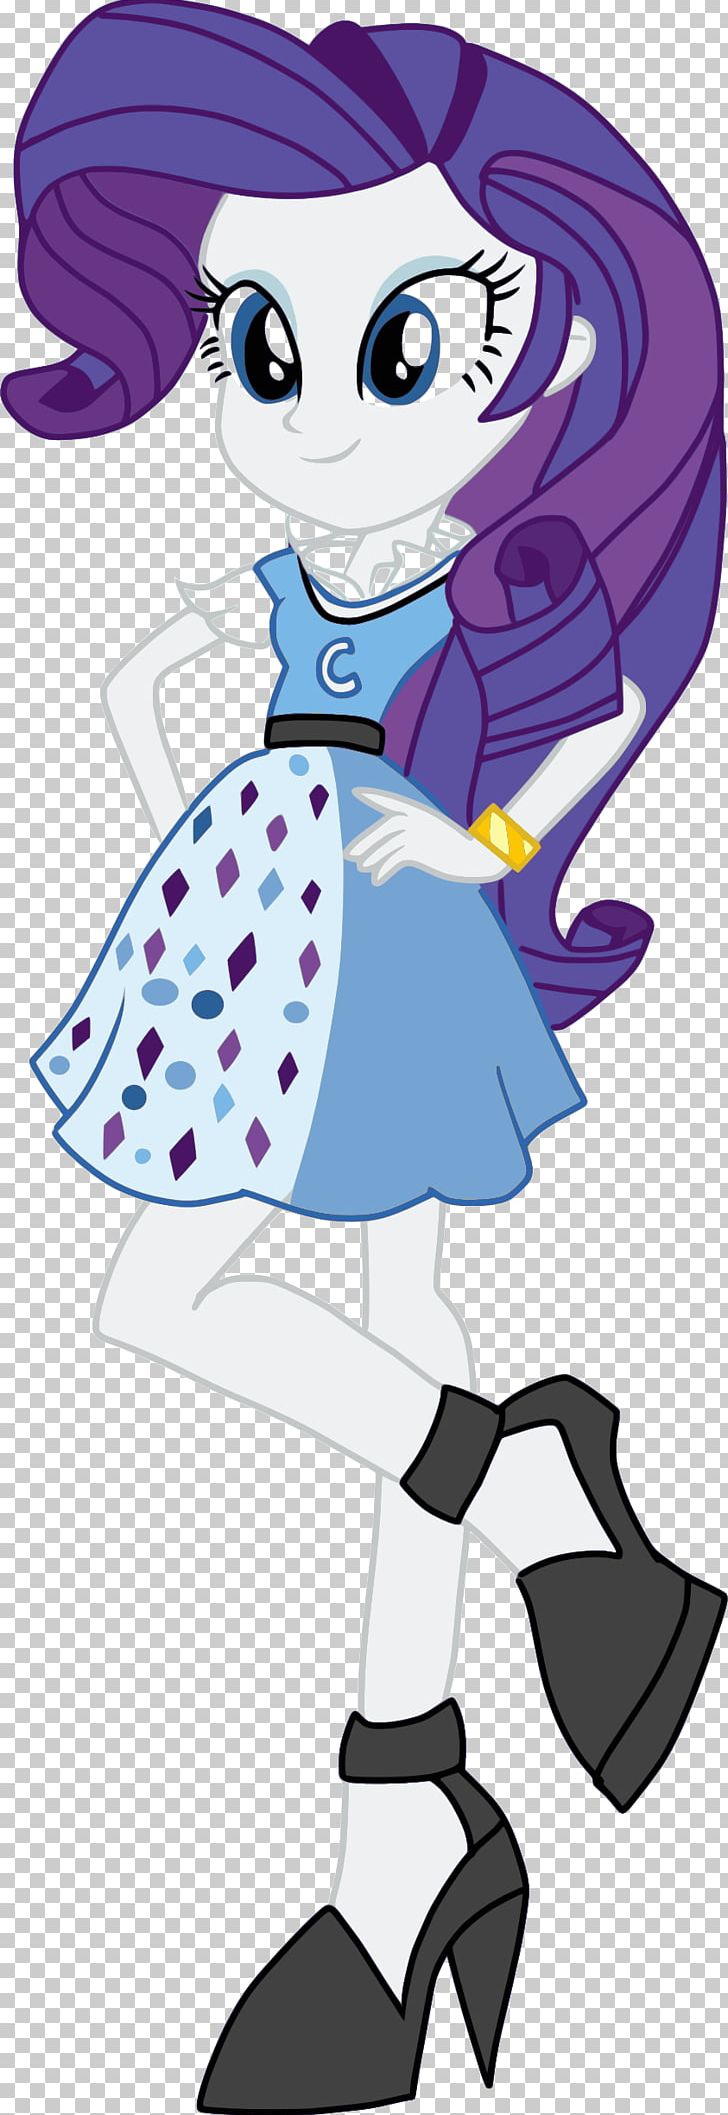 Rarity Pony Twilight Sparkle Equestria Rainbow Dash PNG, Clipart,  Free PNG Download